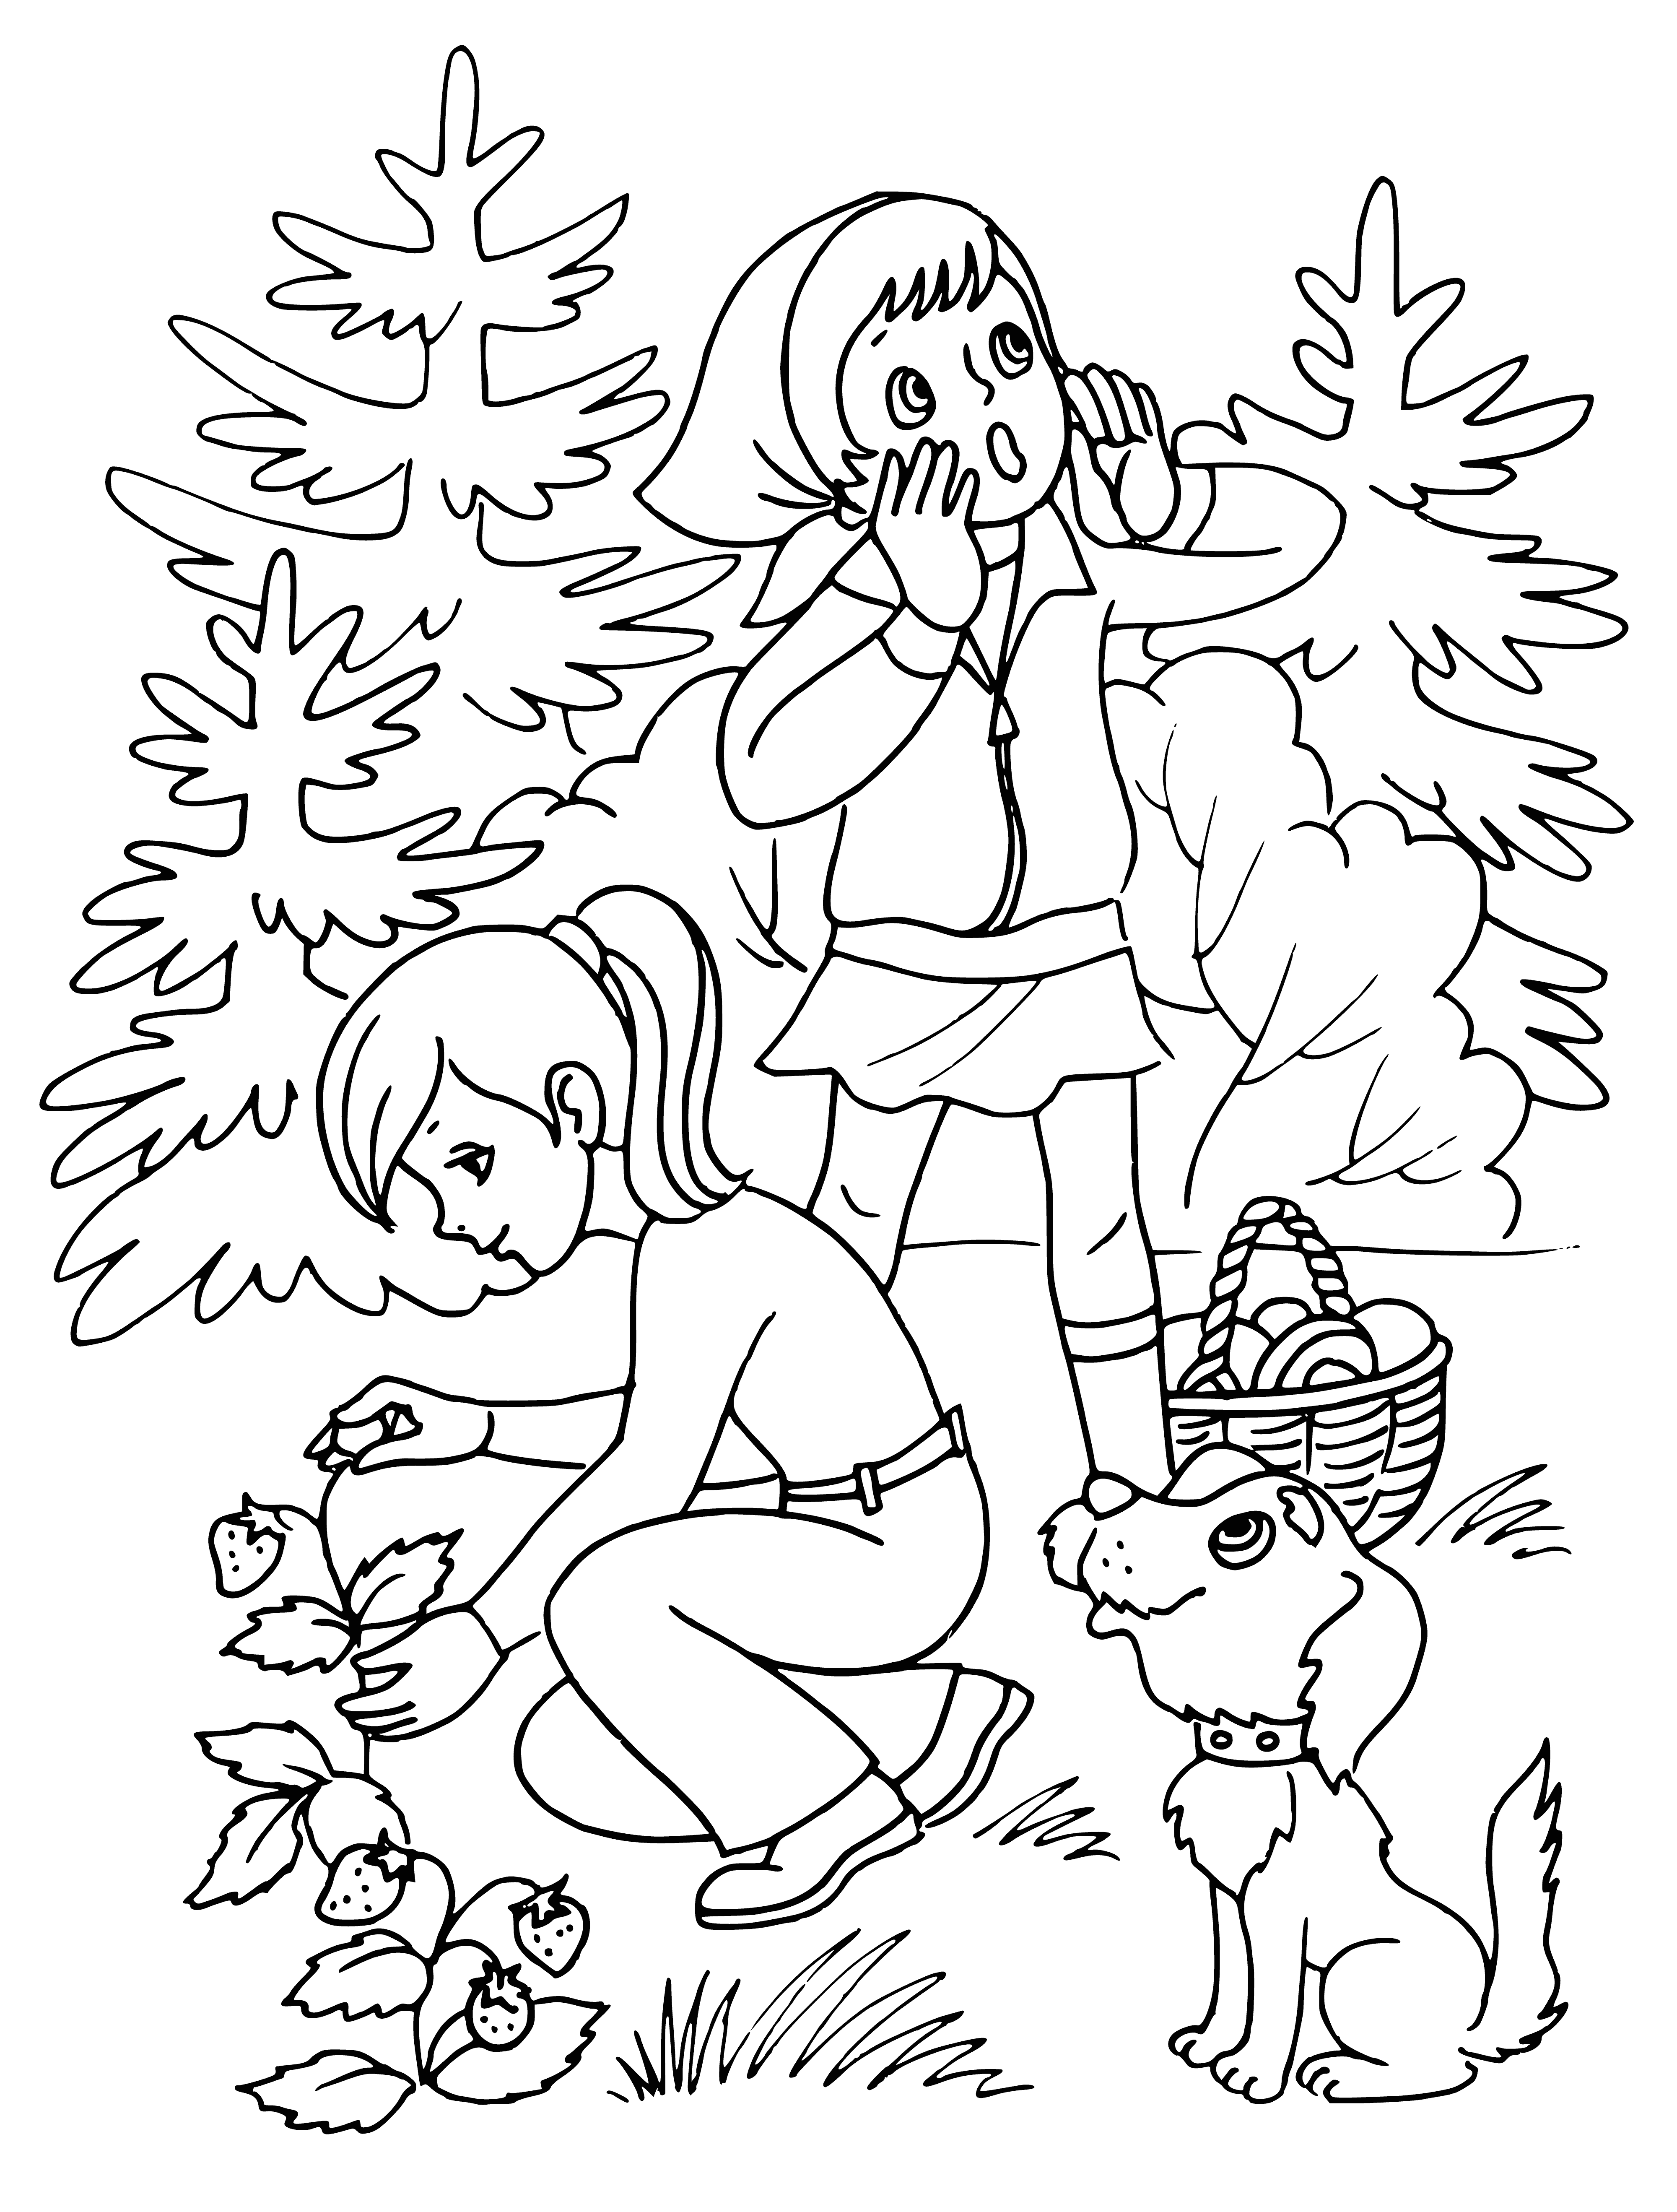 coloring page: Children have fun in the summer forest, picking flowers, climbing trees and running around with the sun shining and the sky's blue.